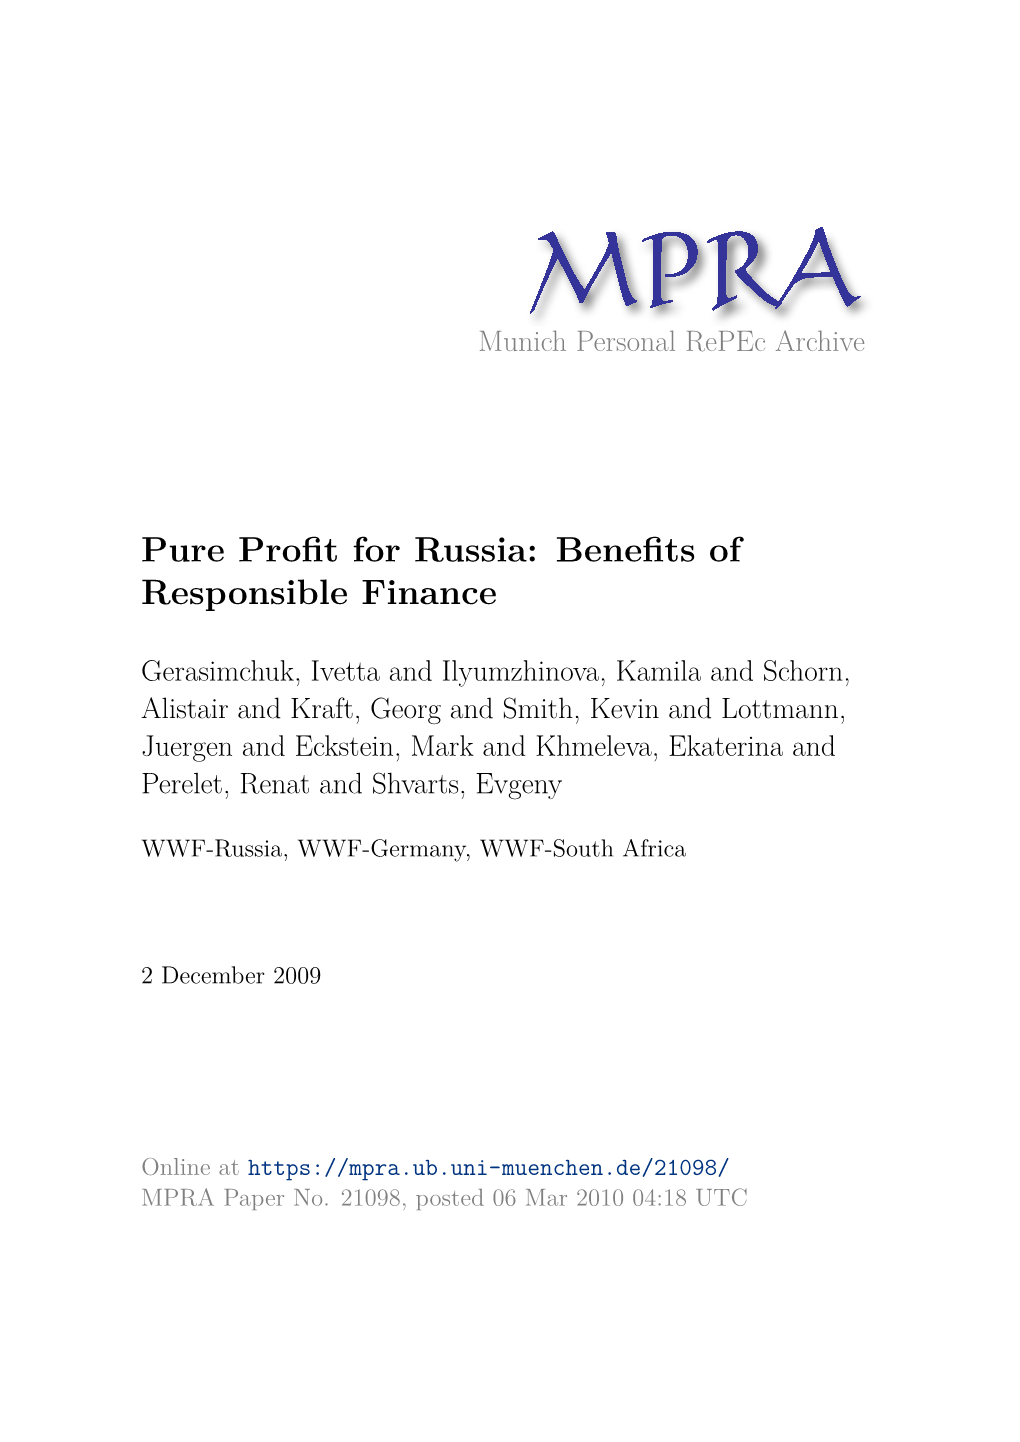 Pure Profit for Russia: Benefits of Responsible Finance